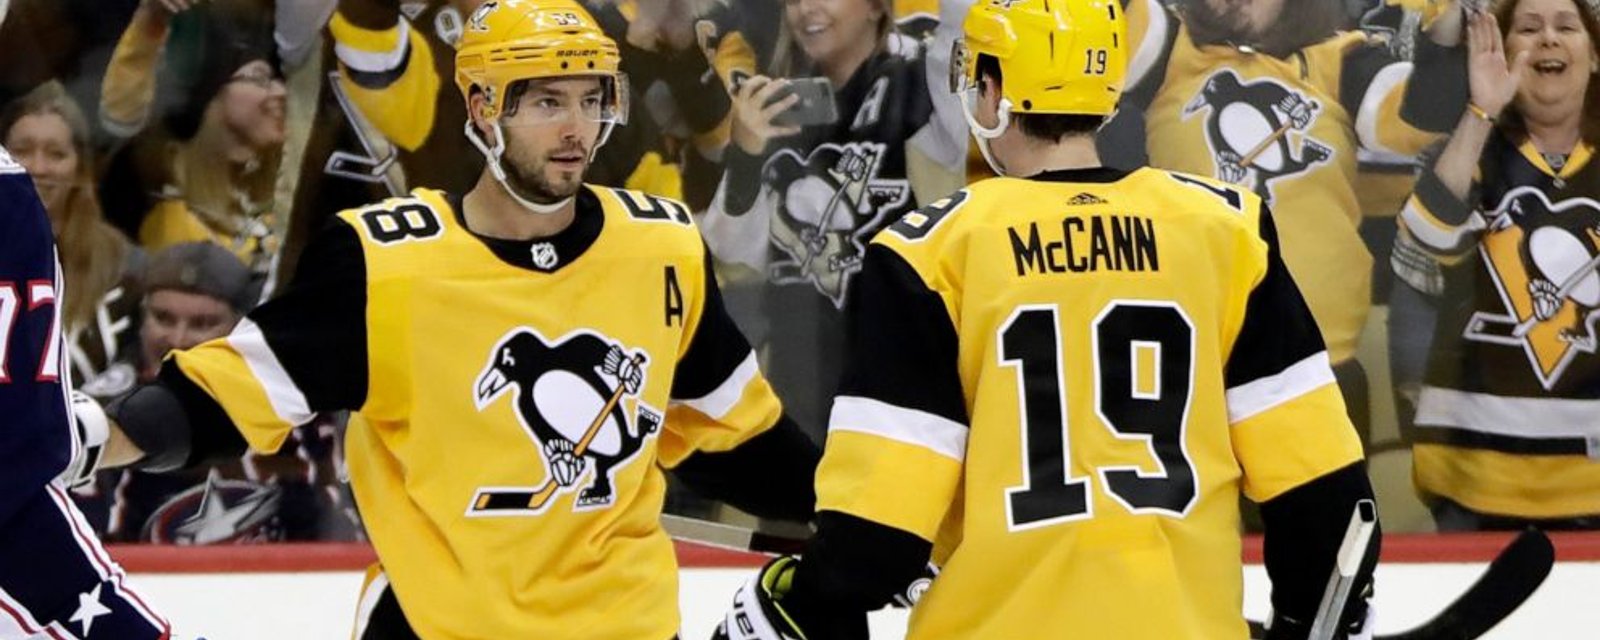 Penguins and Leafs make a last minute trade before the roster freeze.